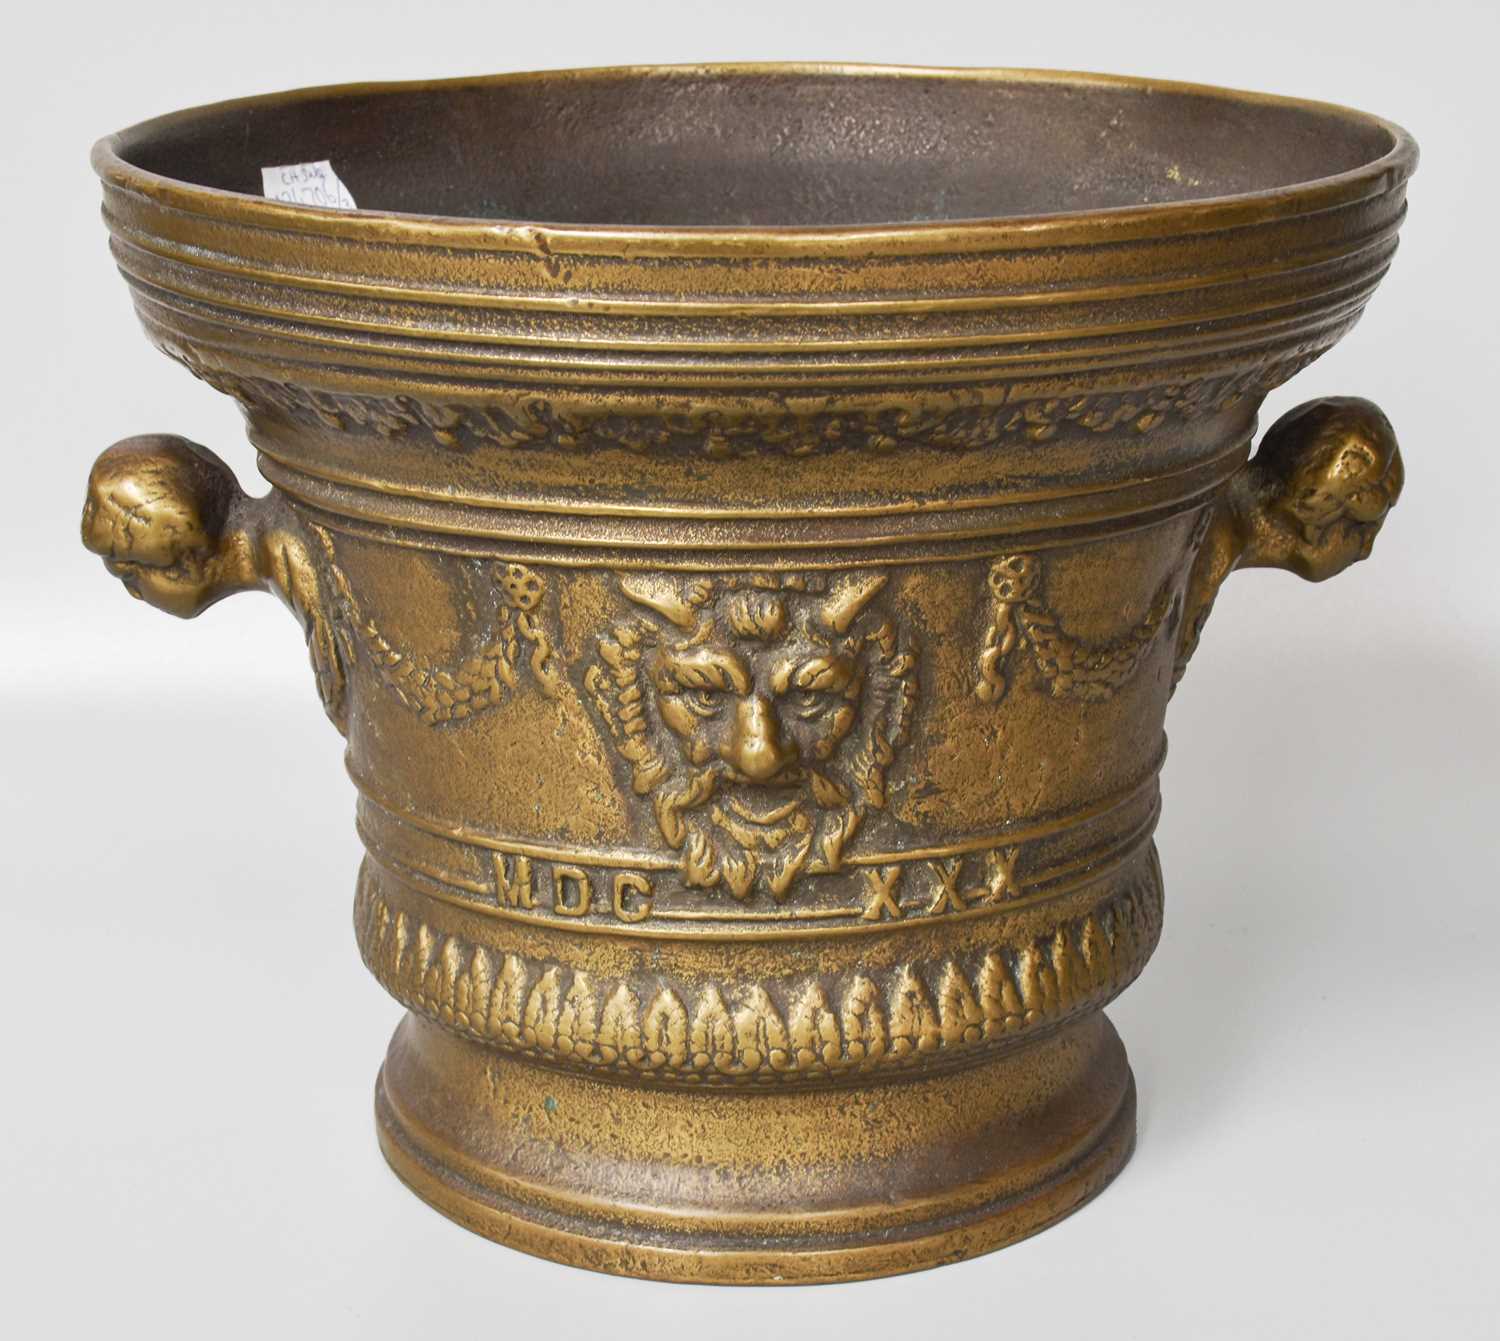 A Reproduction 17th Century Style Bronze Mortar, cast with the roman numerals MDCXXX